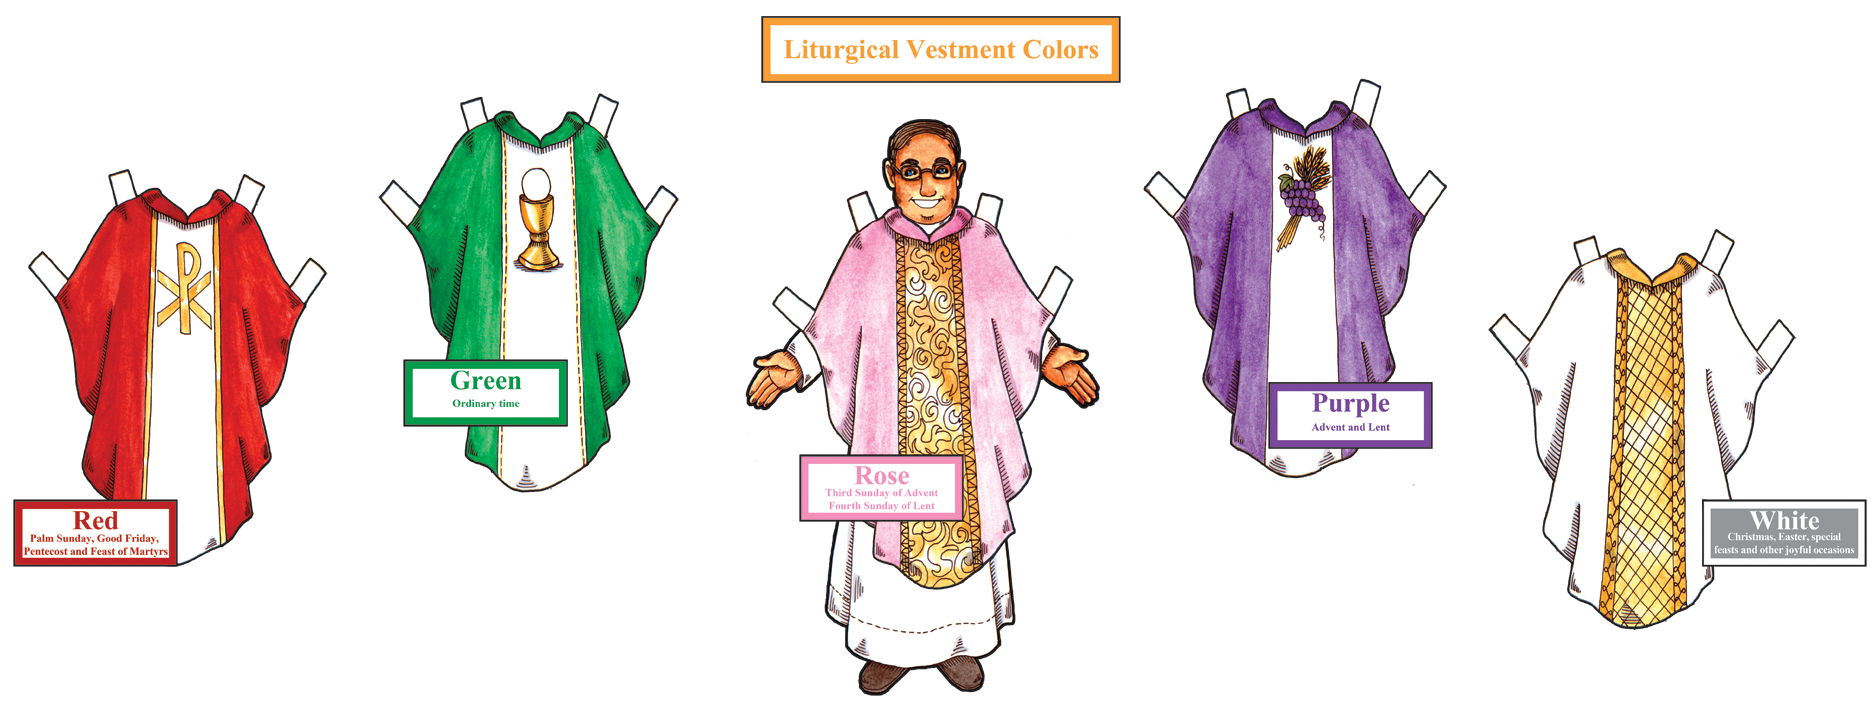 Father Nick and His Vestments